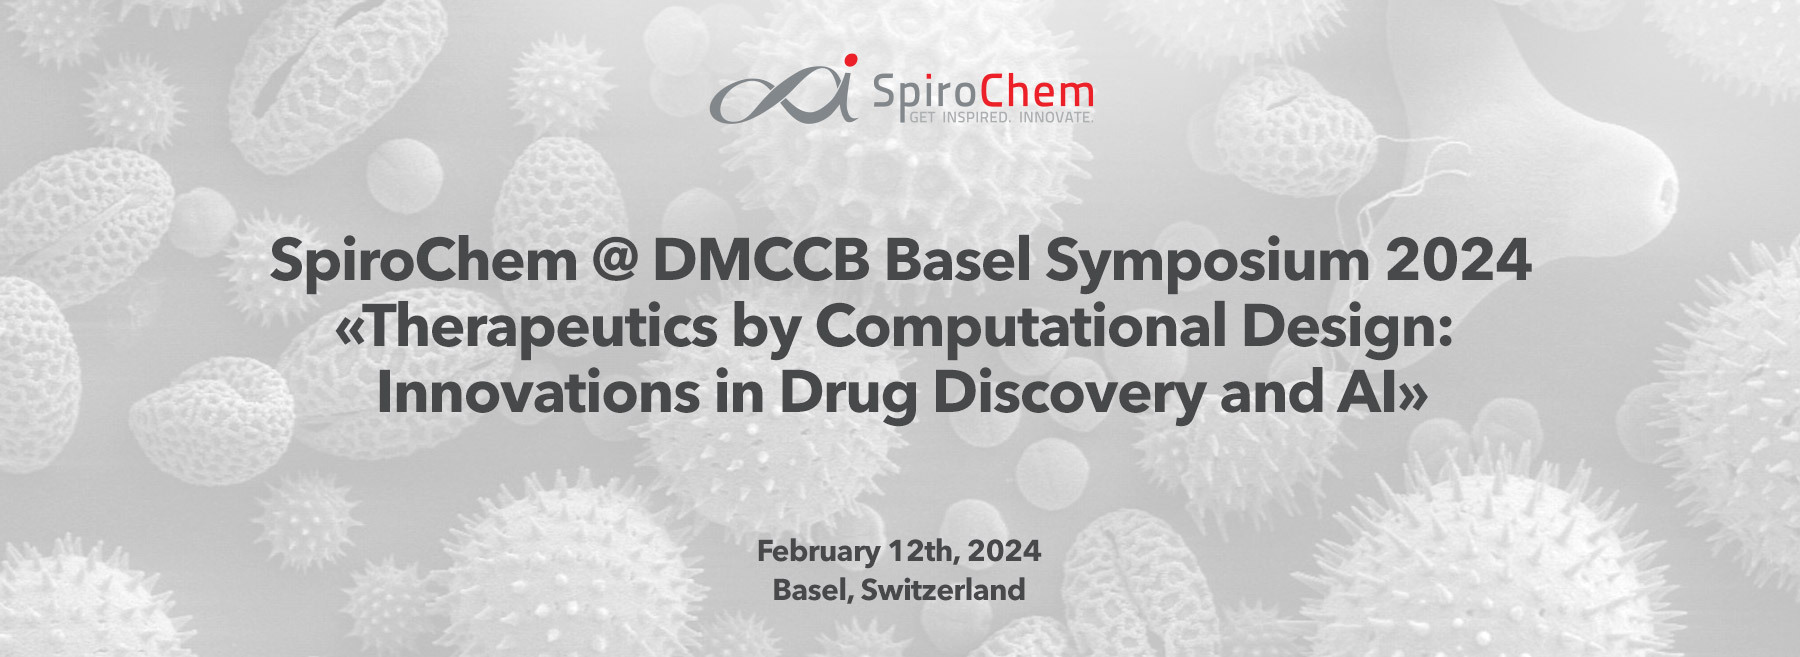 DMCCB Basel Symposium 2024 «Therapeutics by Computational Design: Innovations in Drug Discovery and AI»